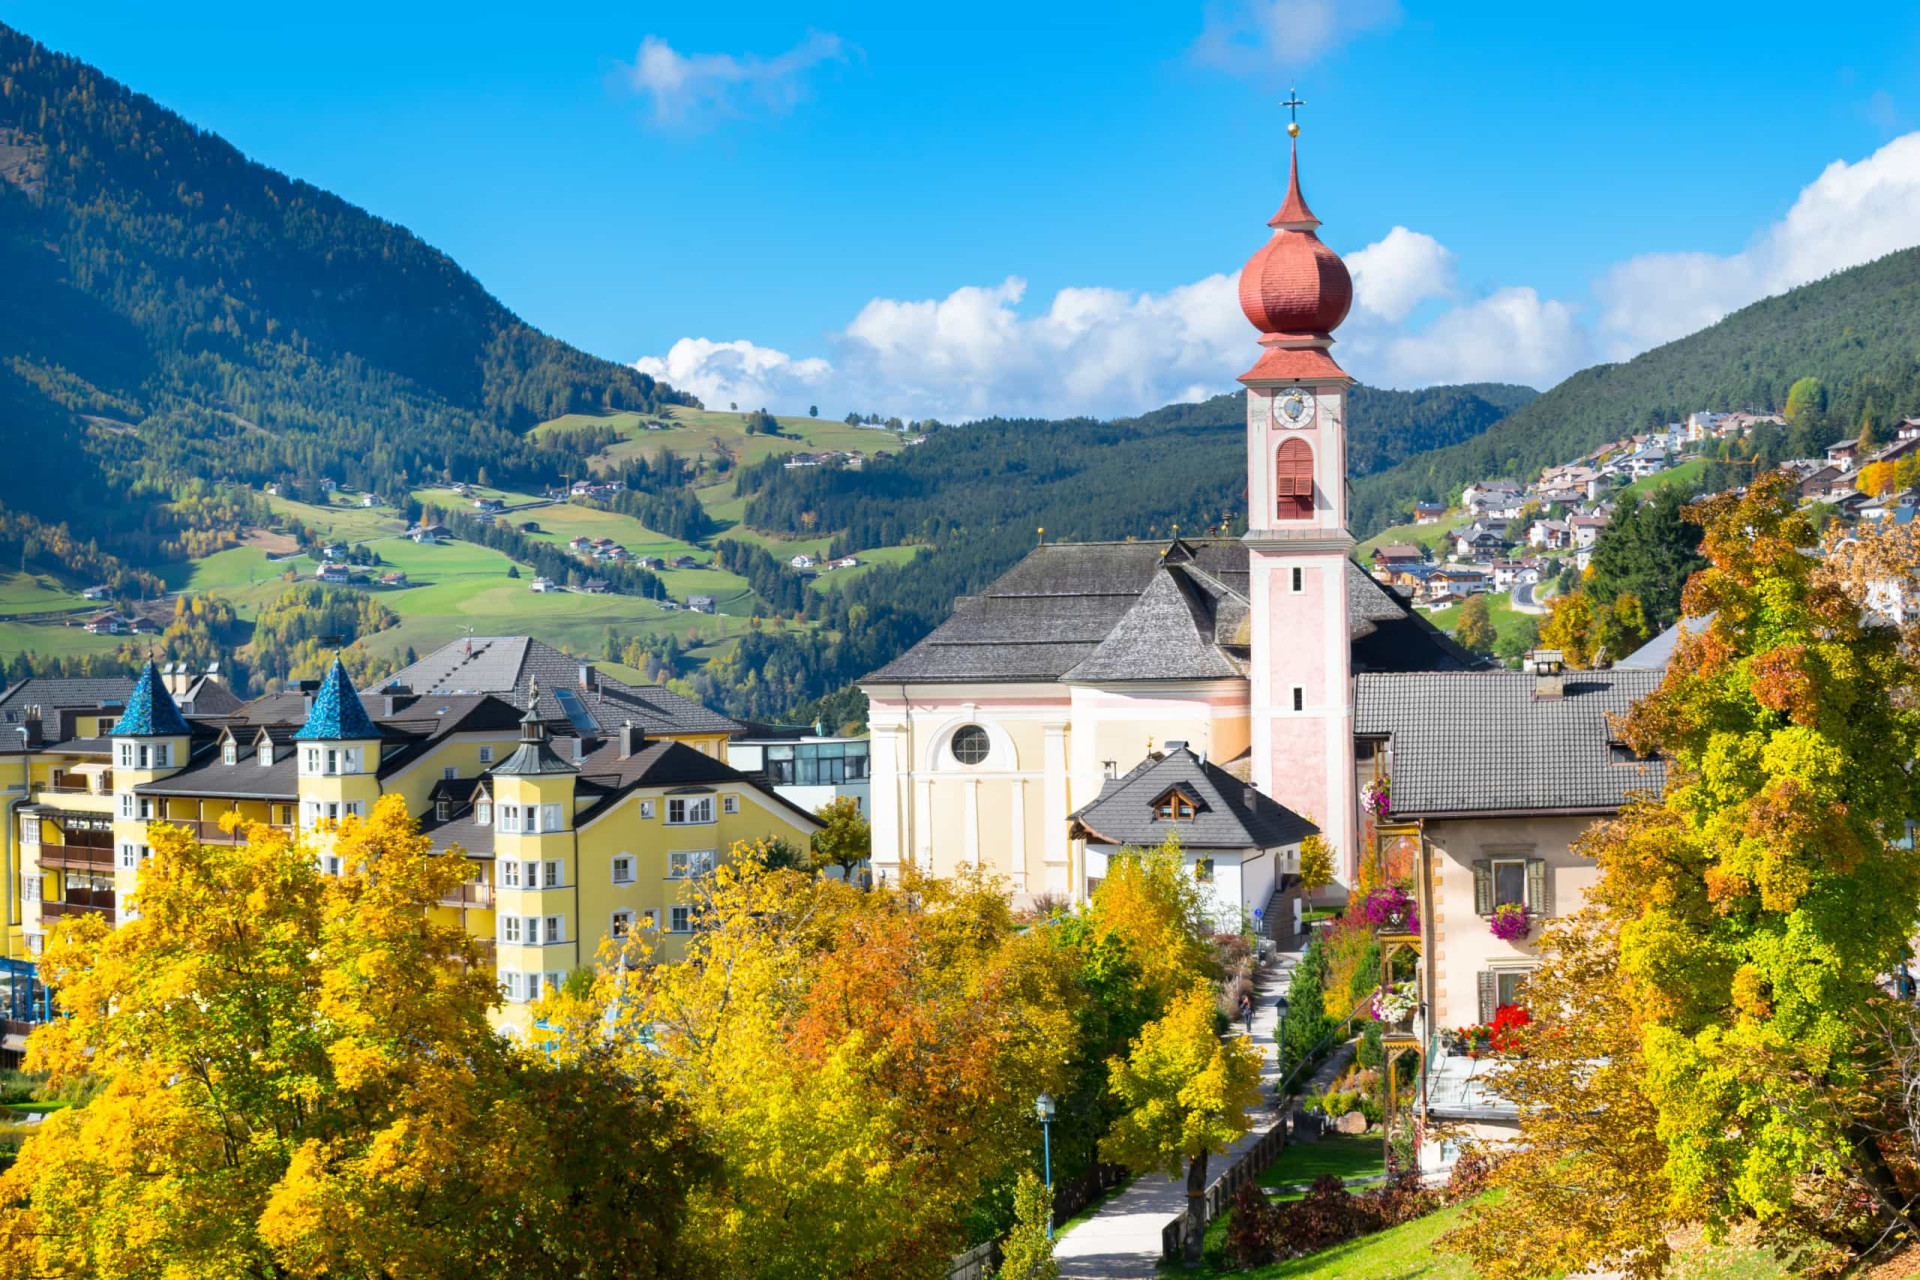 <p>Located within the Dolomites mountain range, the market town of Ortisei in Italy's South Tyrol province is centered around the beautiful little baroque church of Sant’Ulrico, recognized for its onion-shaped dome.</p>